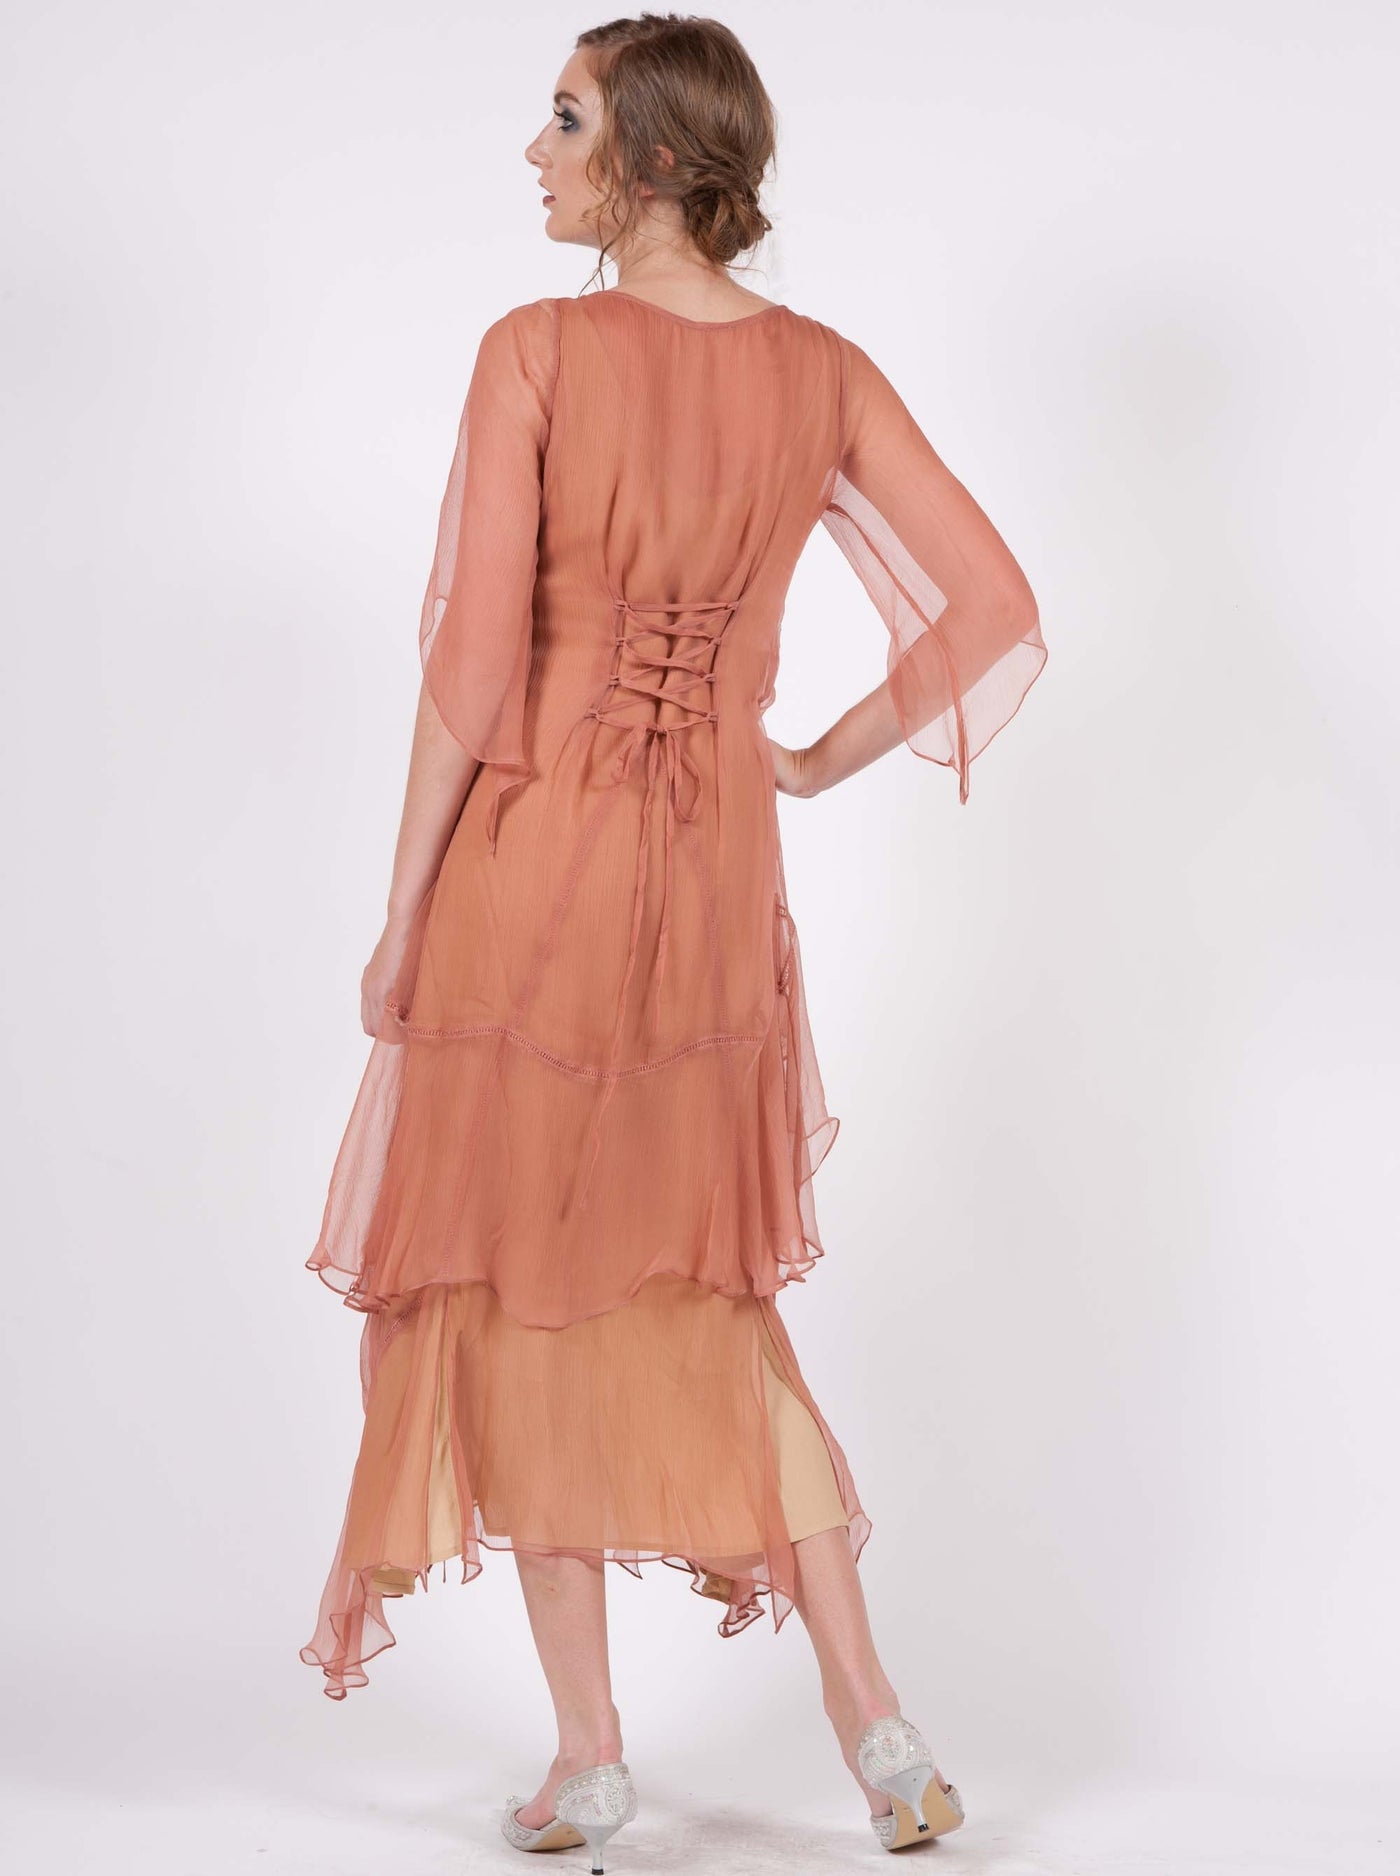 Great Gatsby Party Dress in Rose-Gold by Nataya - SOLD OUT